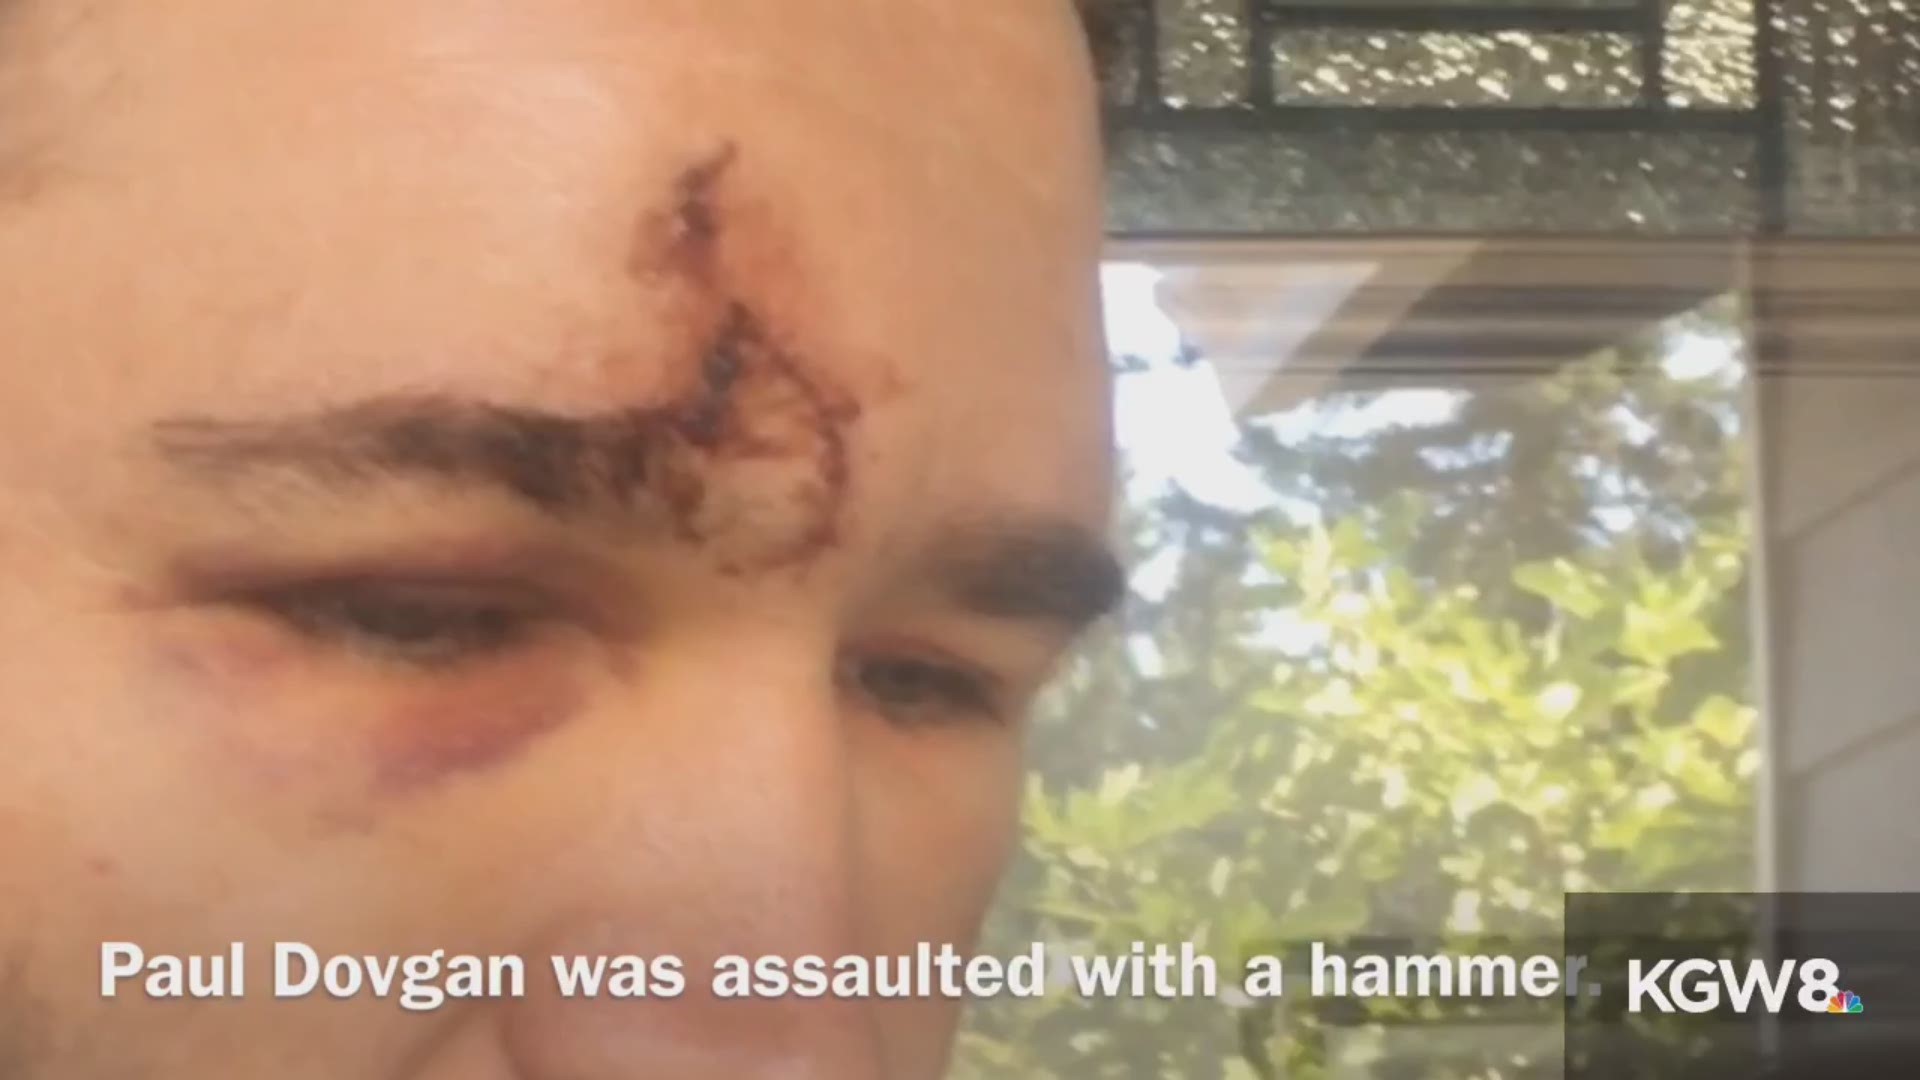 Paul Dovgan was assaulted with a hammer.